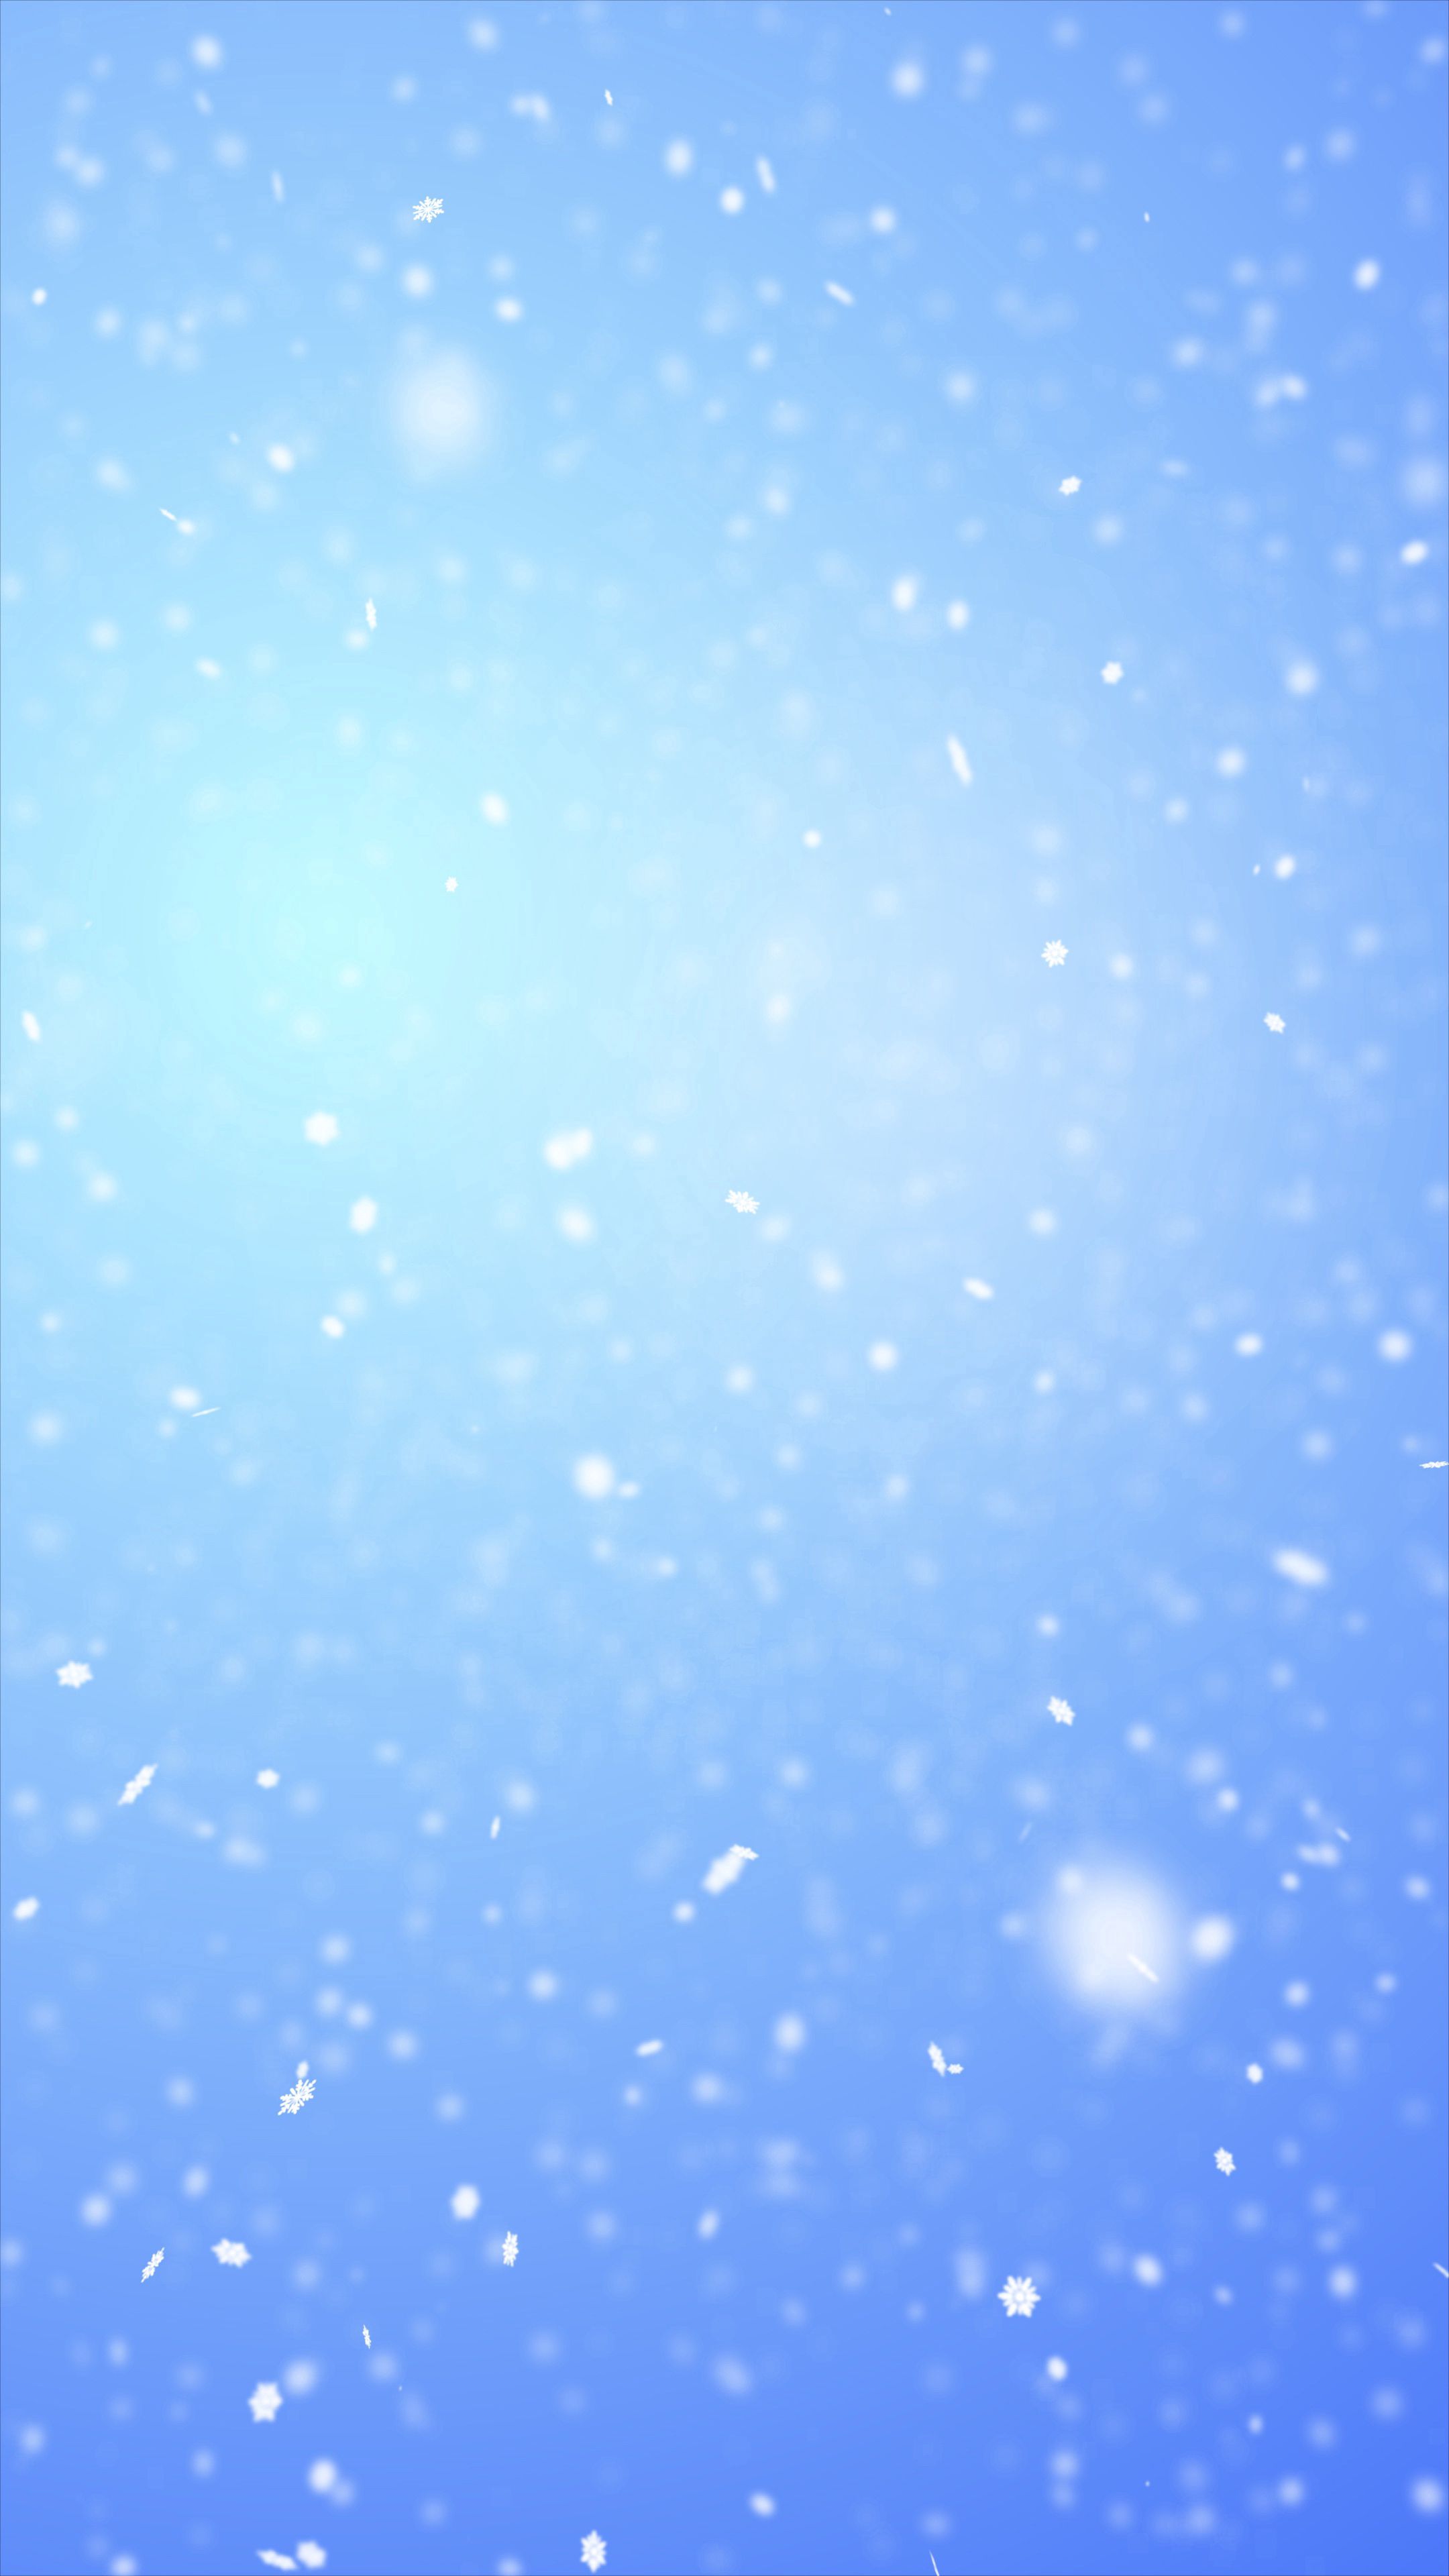 111020 download wallpaper winter, background, snow, snowflakes, blue, light, texture, textures, light coloured, snowfall screensavers and pictures for free